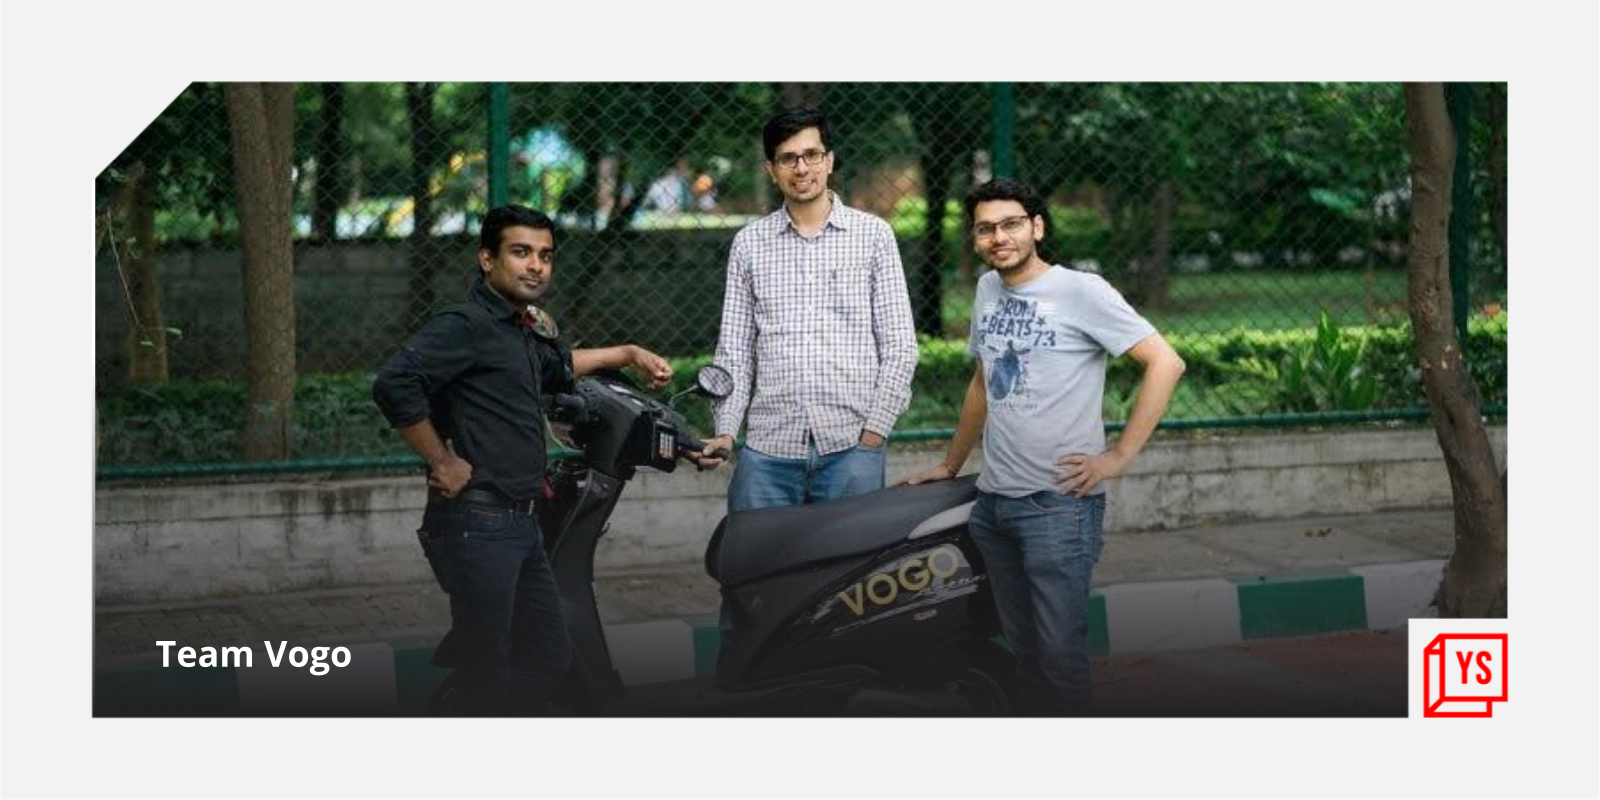 After Shuttl, public transport tech startup Chalo acquires Vogo